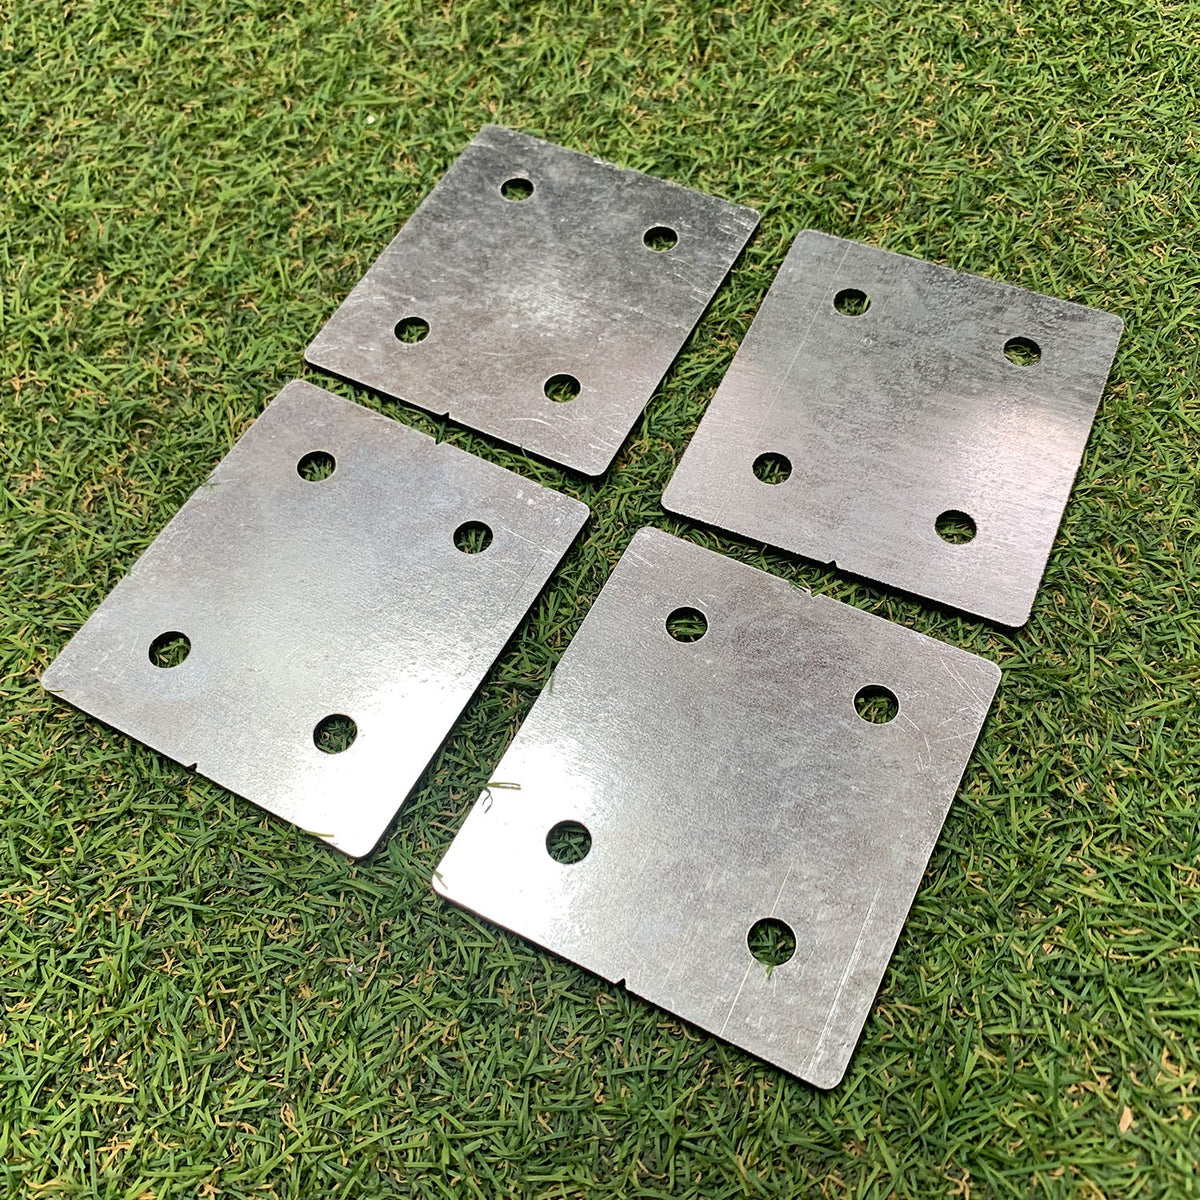 Extra Strong Flat Galvanised Steel Square Bracket | Indoor Outdoors